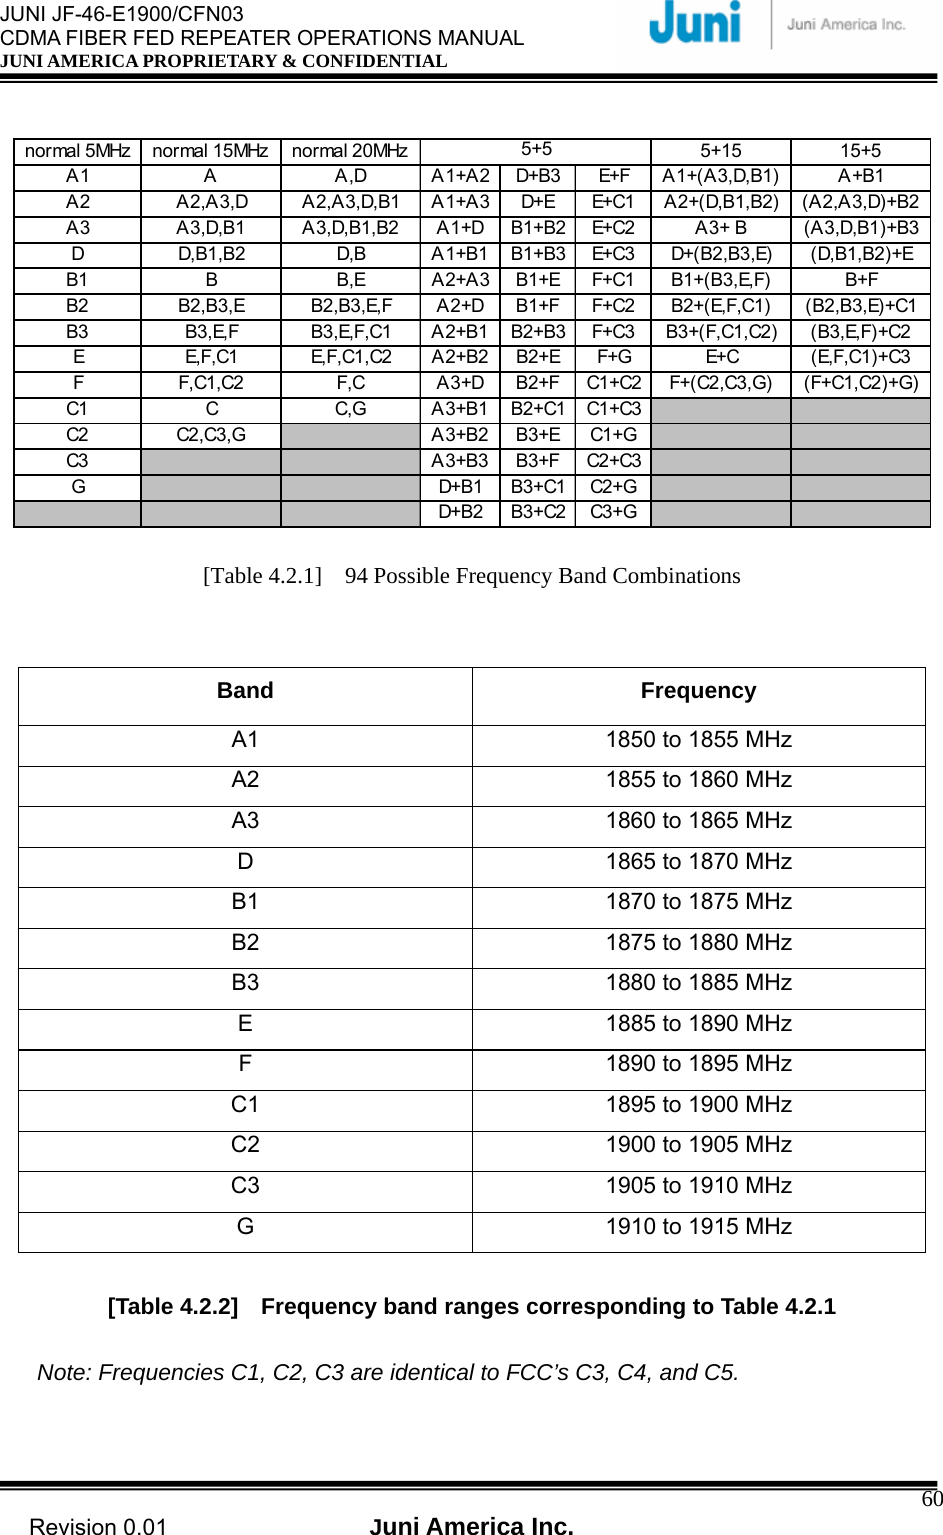  JUNI JF-46-E1900/CFN03 CDMA FIBER FED REPEATER OPERATIONS MANUAL JUNI AMERICA PROPRIETARY &amp; CONFIDENTIAL                                   Revision 0.01  Juni America Inc.  60normal 5MHz normal 15MHz normal 20MHz 5+15 15+5A1 A A,D A1+A2 D+B3 E+F A1+(A3,D,B1) A+B1A2 A2,A3,D A2,A3,D,B1 A1+A3 D+E E+C1 A2+(D,B1,B2) (A2,A3,D)+B2A3 A3,D,B1 A3,D,B1,B2 A1+D B1+B2 E+C2 A3+ B (A3,D,B1)+B3D D,B1,B2 D,B A1+B1 B1+B3 E+C3 D+(B2,B3,E) (D,B1,B2)+EB1 B B,E A2+A3 B1+E F+C1 B1+(B3,E,F) B+FB2 B2,B3,E B2,B3,E,F A2+D B1+F F+C2 B2+(E,F,C1) (B2,B3,E)+C1B3 B3,E,F B3,E,F,C1 A2+B1 B2+B3 F+C3 B3+(F,C1,C2) (B3,E,F)+C2E E,F,C1 E,F,C1,C2 A2+B2 B2+E F+G E+C (E,F,C1)+C3F F,C1,C2 F,C A3+D B2+F C1+C2 F+(C2,C3,G) (F+C1,C2)+G)C1 C C,G A 3+B1 B2+C1 C1+C3C2 C2,C3,G A3+B2 B3+E C1+GC3 A 3+B3 B3+F C2+C3G D+B1 B3+C1 C2+GD+B2 B3+C2 C3+G5+5 [Table 4.2.1]    94 Possible Frequency Band Combinations   Band Frequency A1 1850 to 1855 MHz A2  1855 to 1860 MHz A3  1860 to 1865 MHz D  1865 to 1870 MHz B1  1870 to 1875 MHz B2  1875 to 1880 MHz B3  1880 to 1885 MHz E  1885 to 1890 MHz F  1890 to 1895 MHz C1  1895 to 1900 MHz C2  1900 to 1905 MHz C3  1905 to 1910 MHz G  1910 to 1915 MHz  [Table 4.2.2]    Frequency band ranges corresponding to Table 4.2.1  Note: Frequencies C1, C2, C3 are identical to FCC’s C3, C4, and C5.  